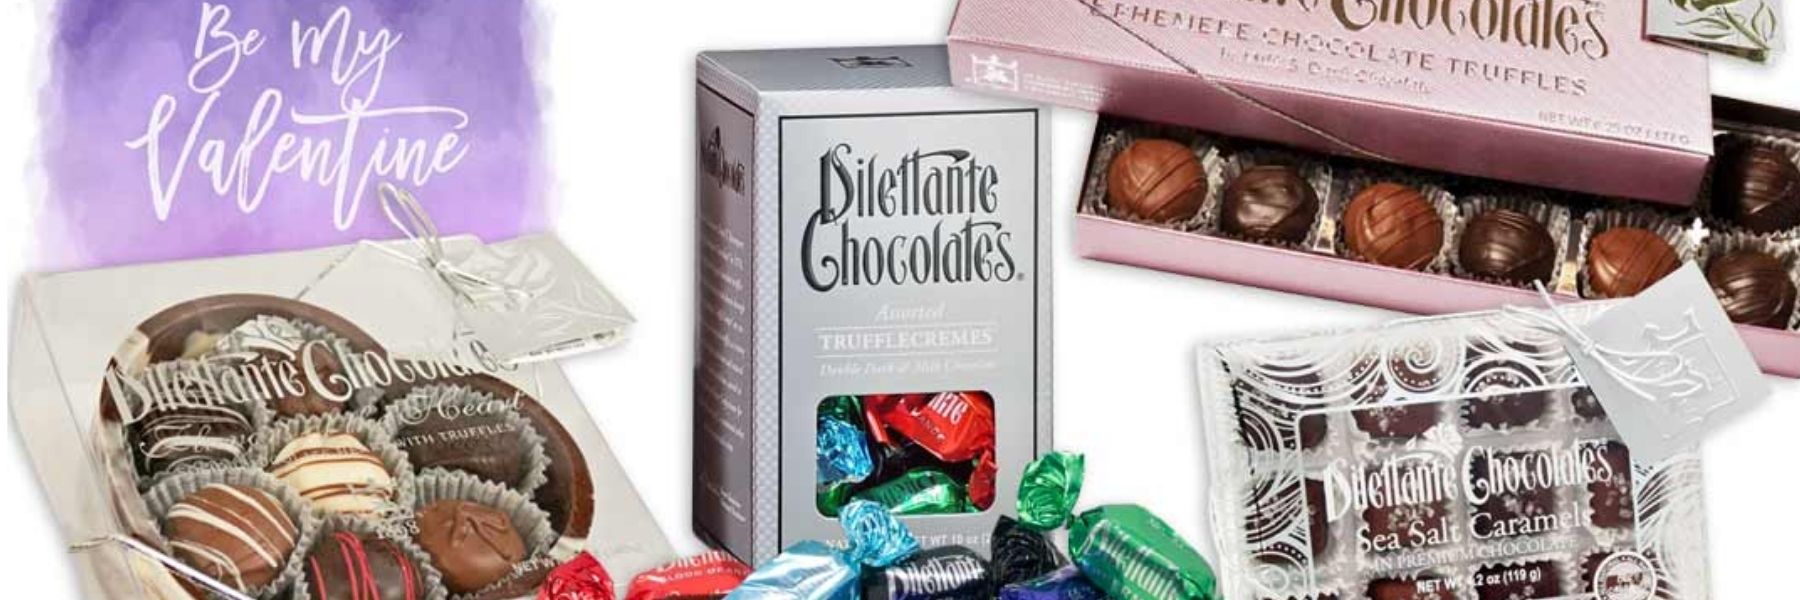 Dilettante Chocolates Valentine's Day 2017 Gift Guide Blog Banner